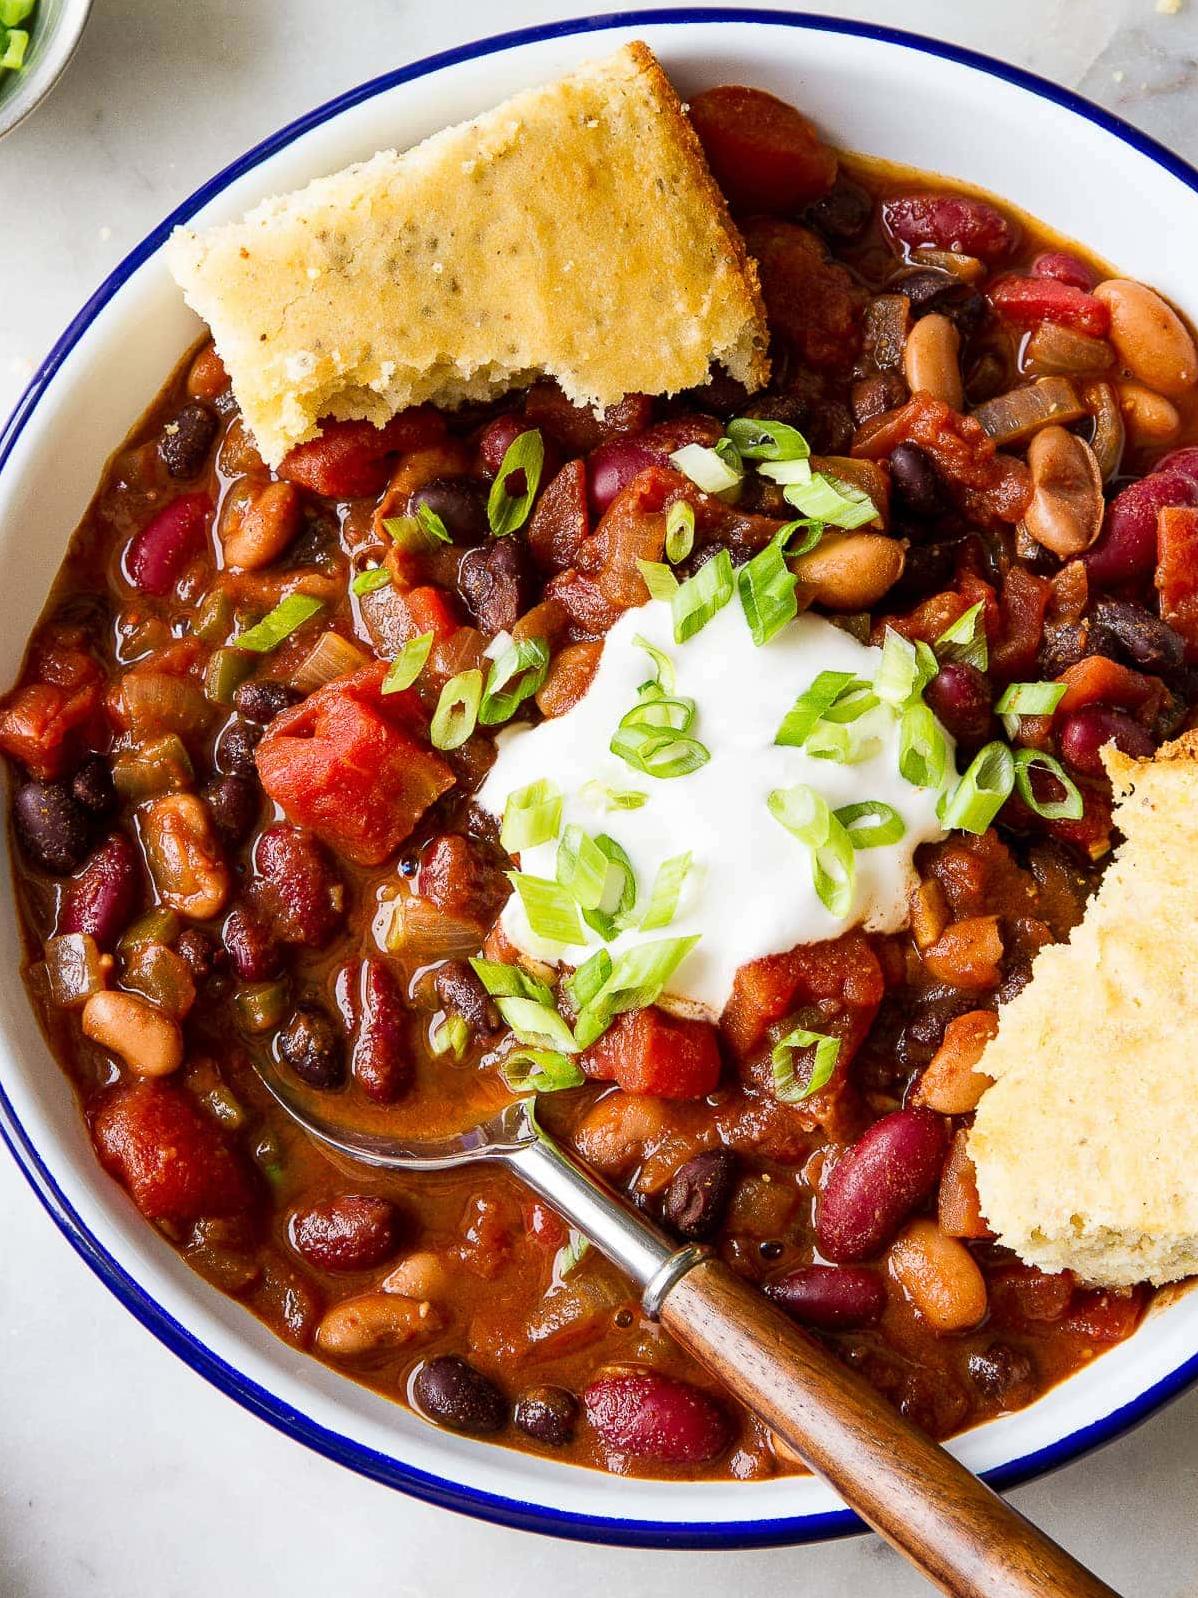  The key to making a good chili is to let it simmer for hours - the longer, the better!